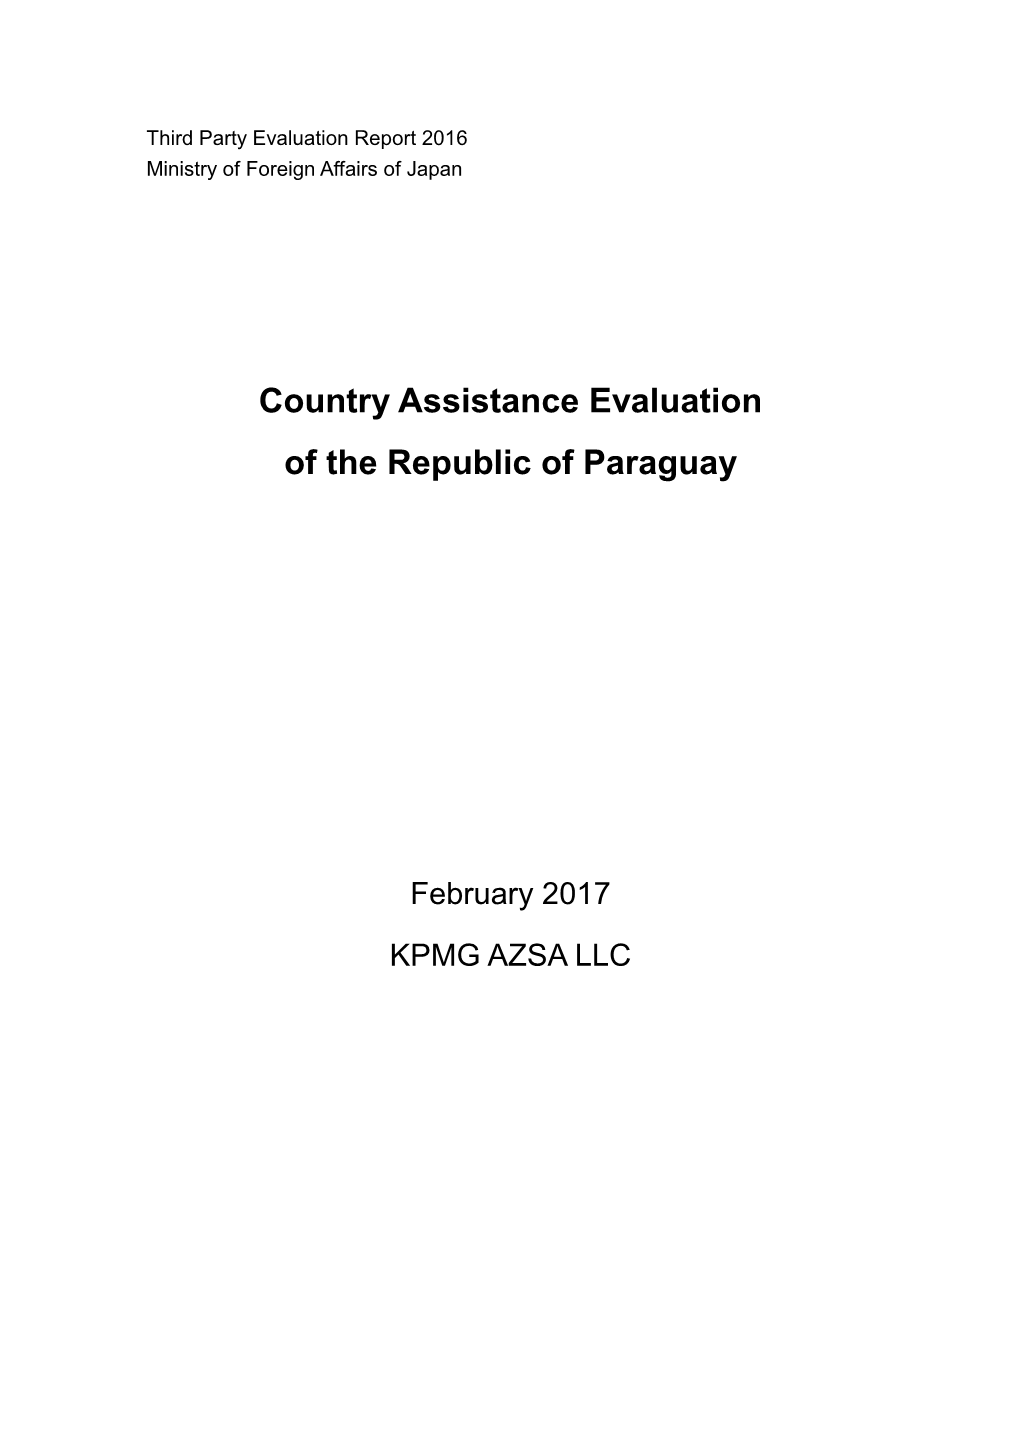 Country Assistance Evaluation of the Republic of Paraguay